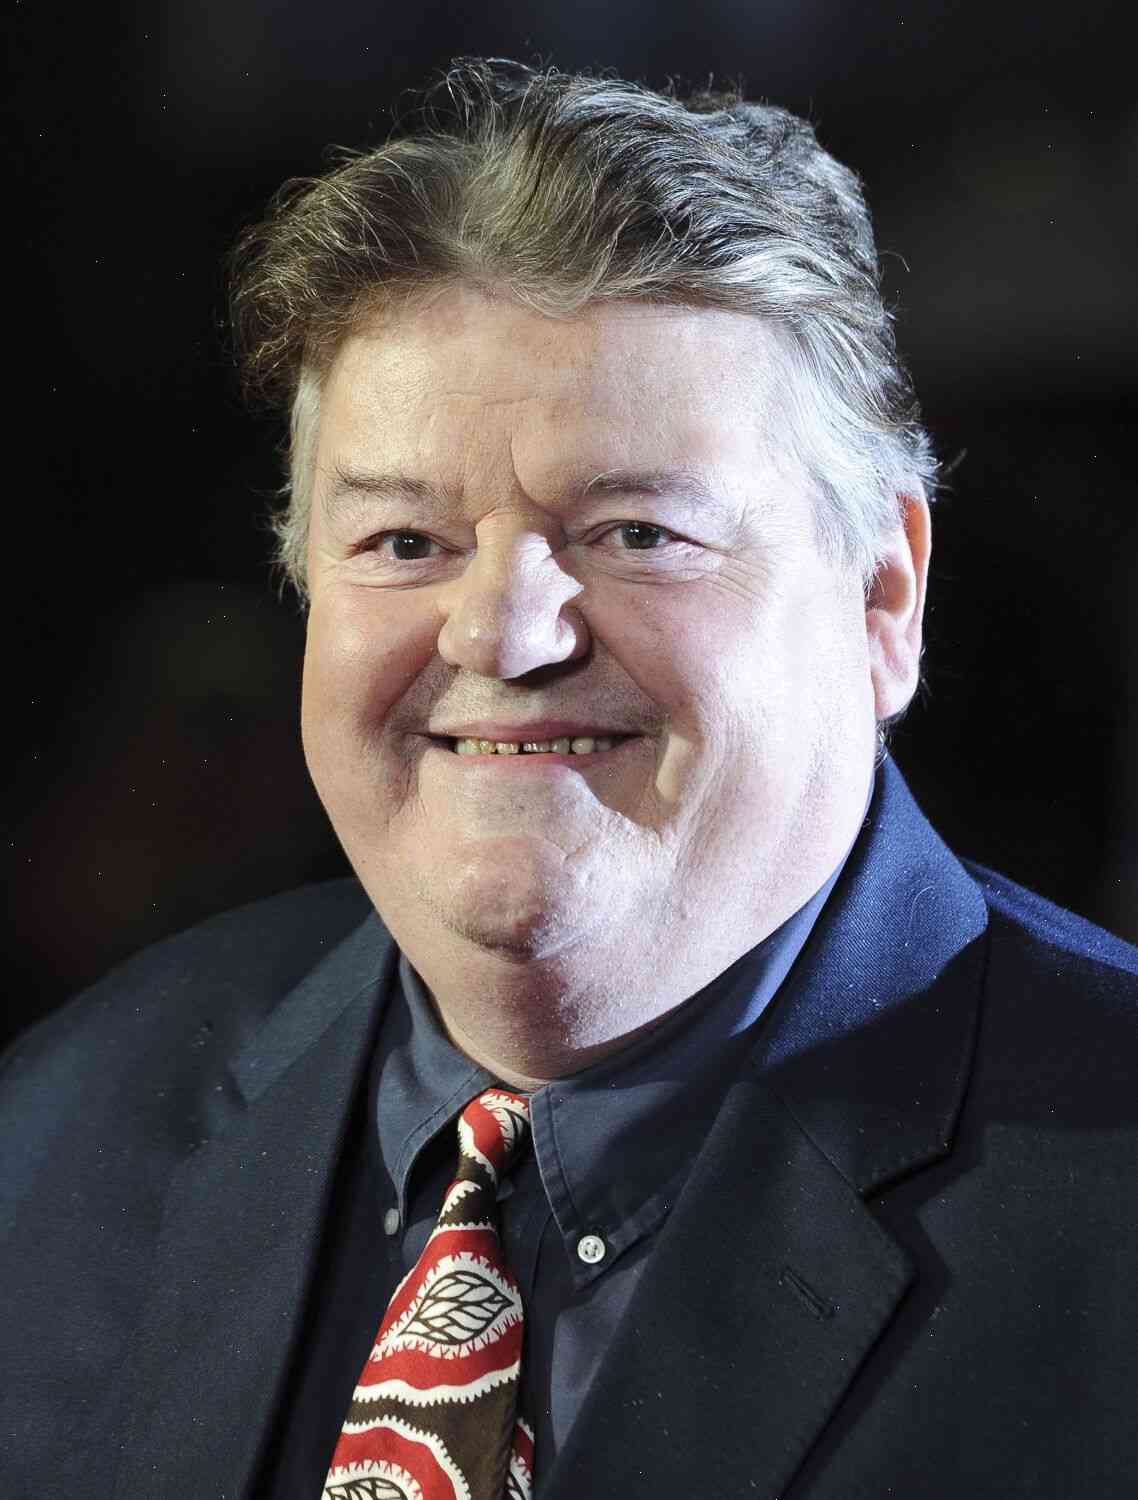 Robbie Coltrane, the ‘Harry Potter’ actor, has died at the age of 72